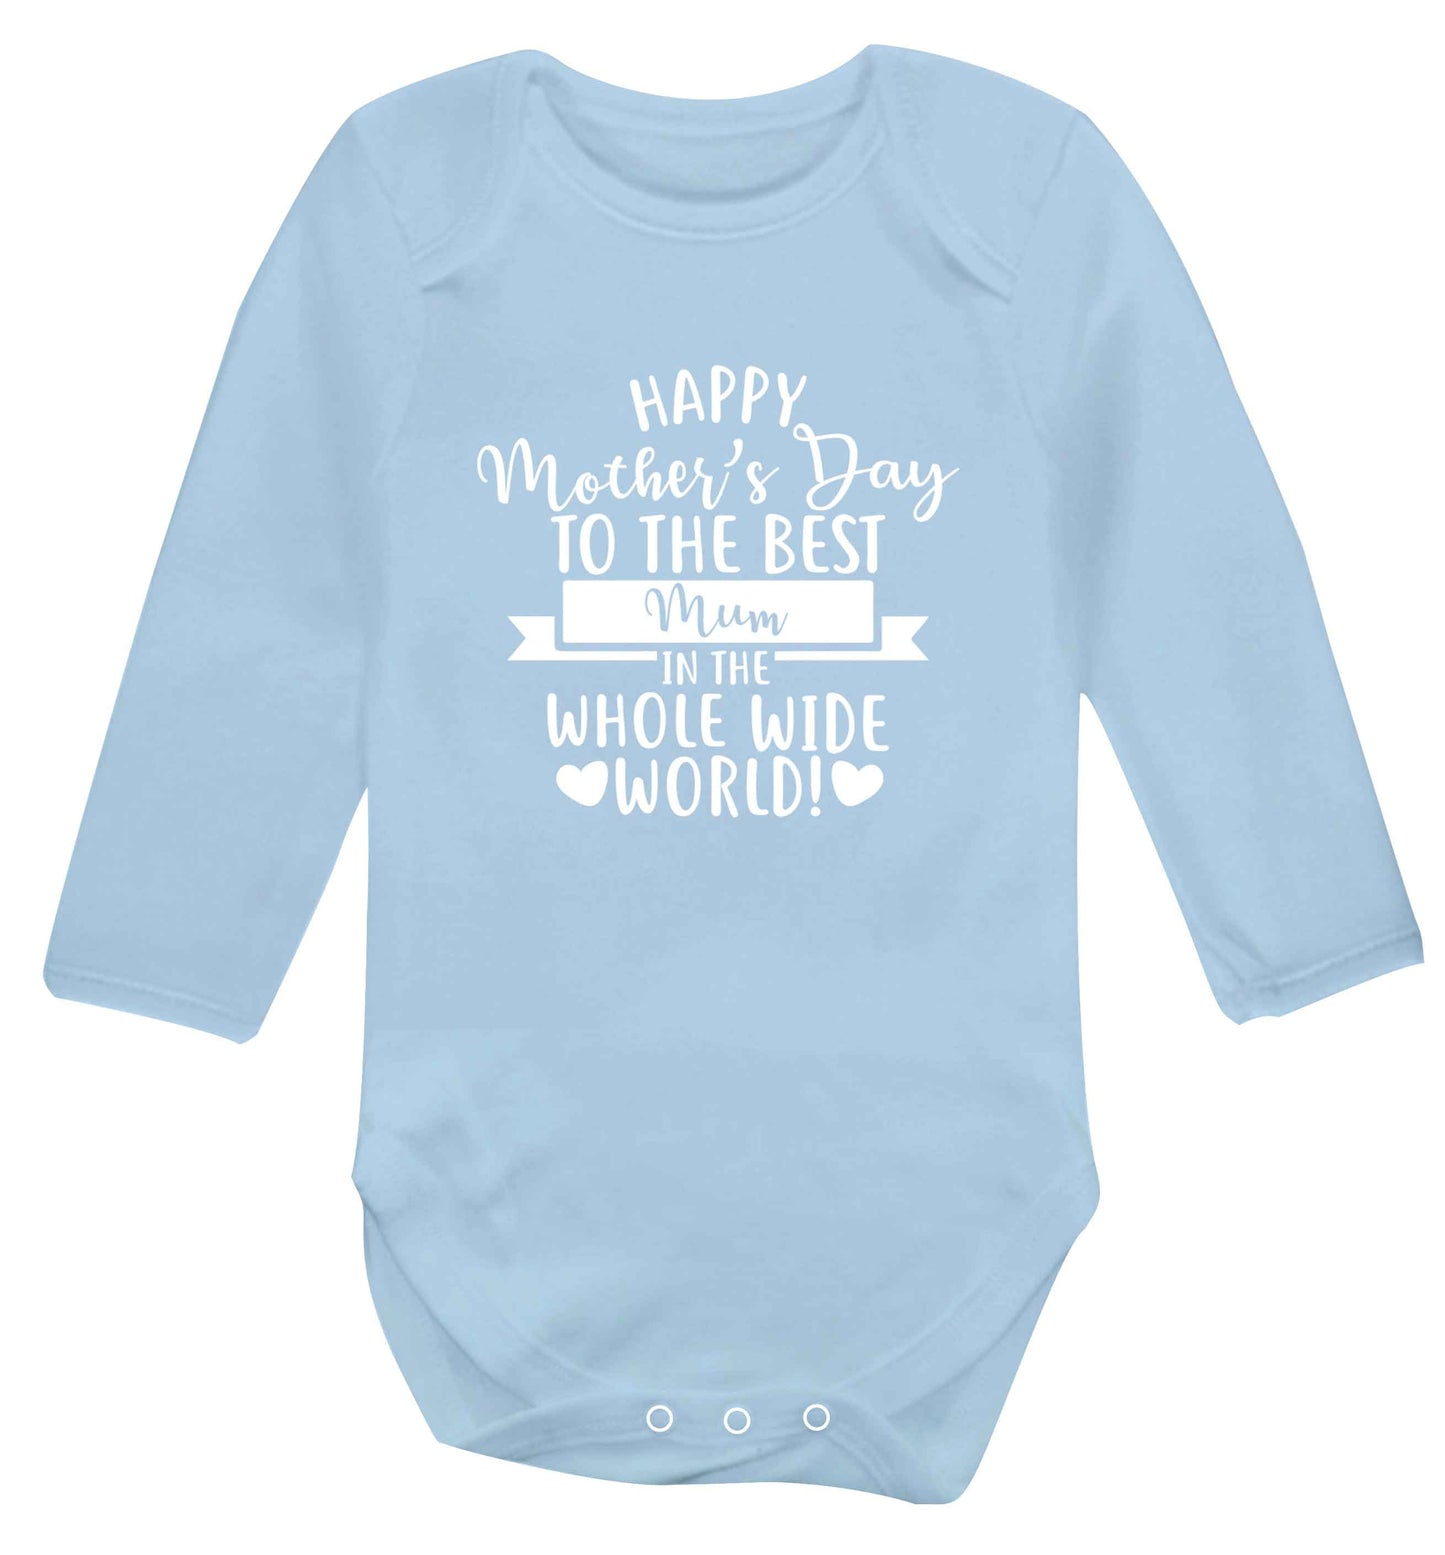 Happy mother's day to the best mum in the world baby vest long sleeved pale blue 6-12 months